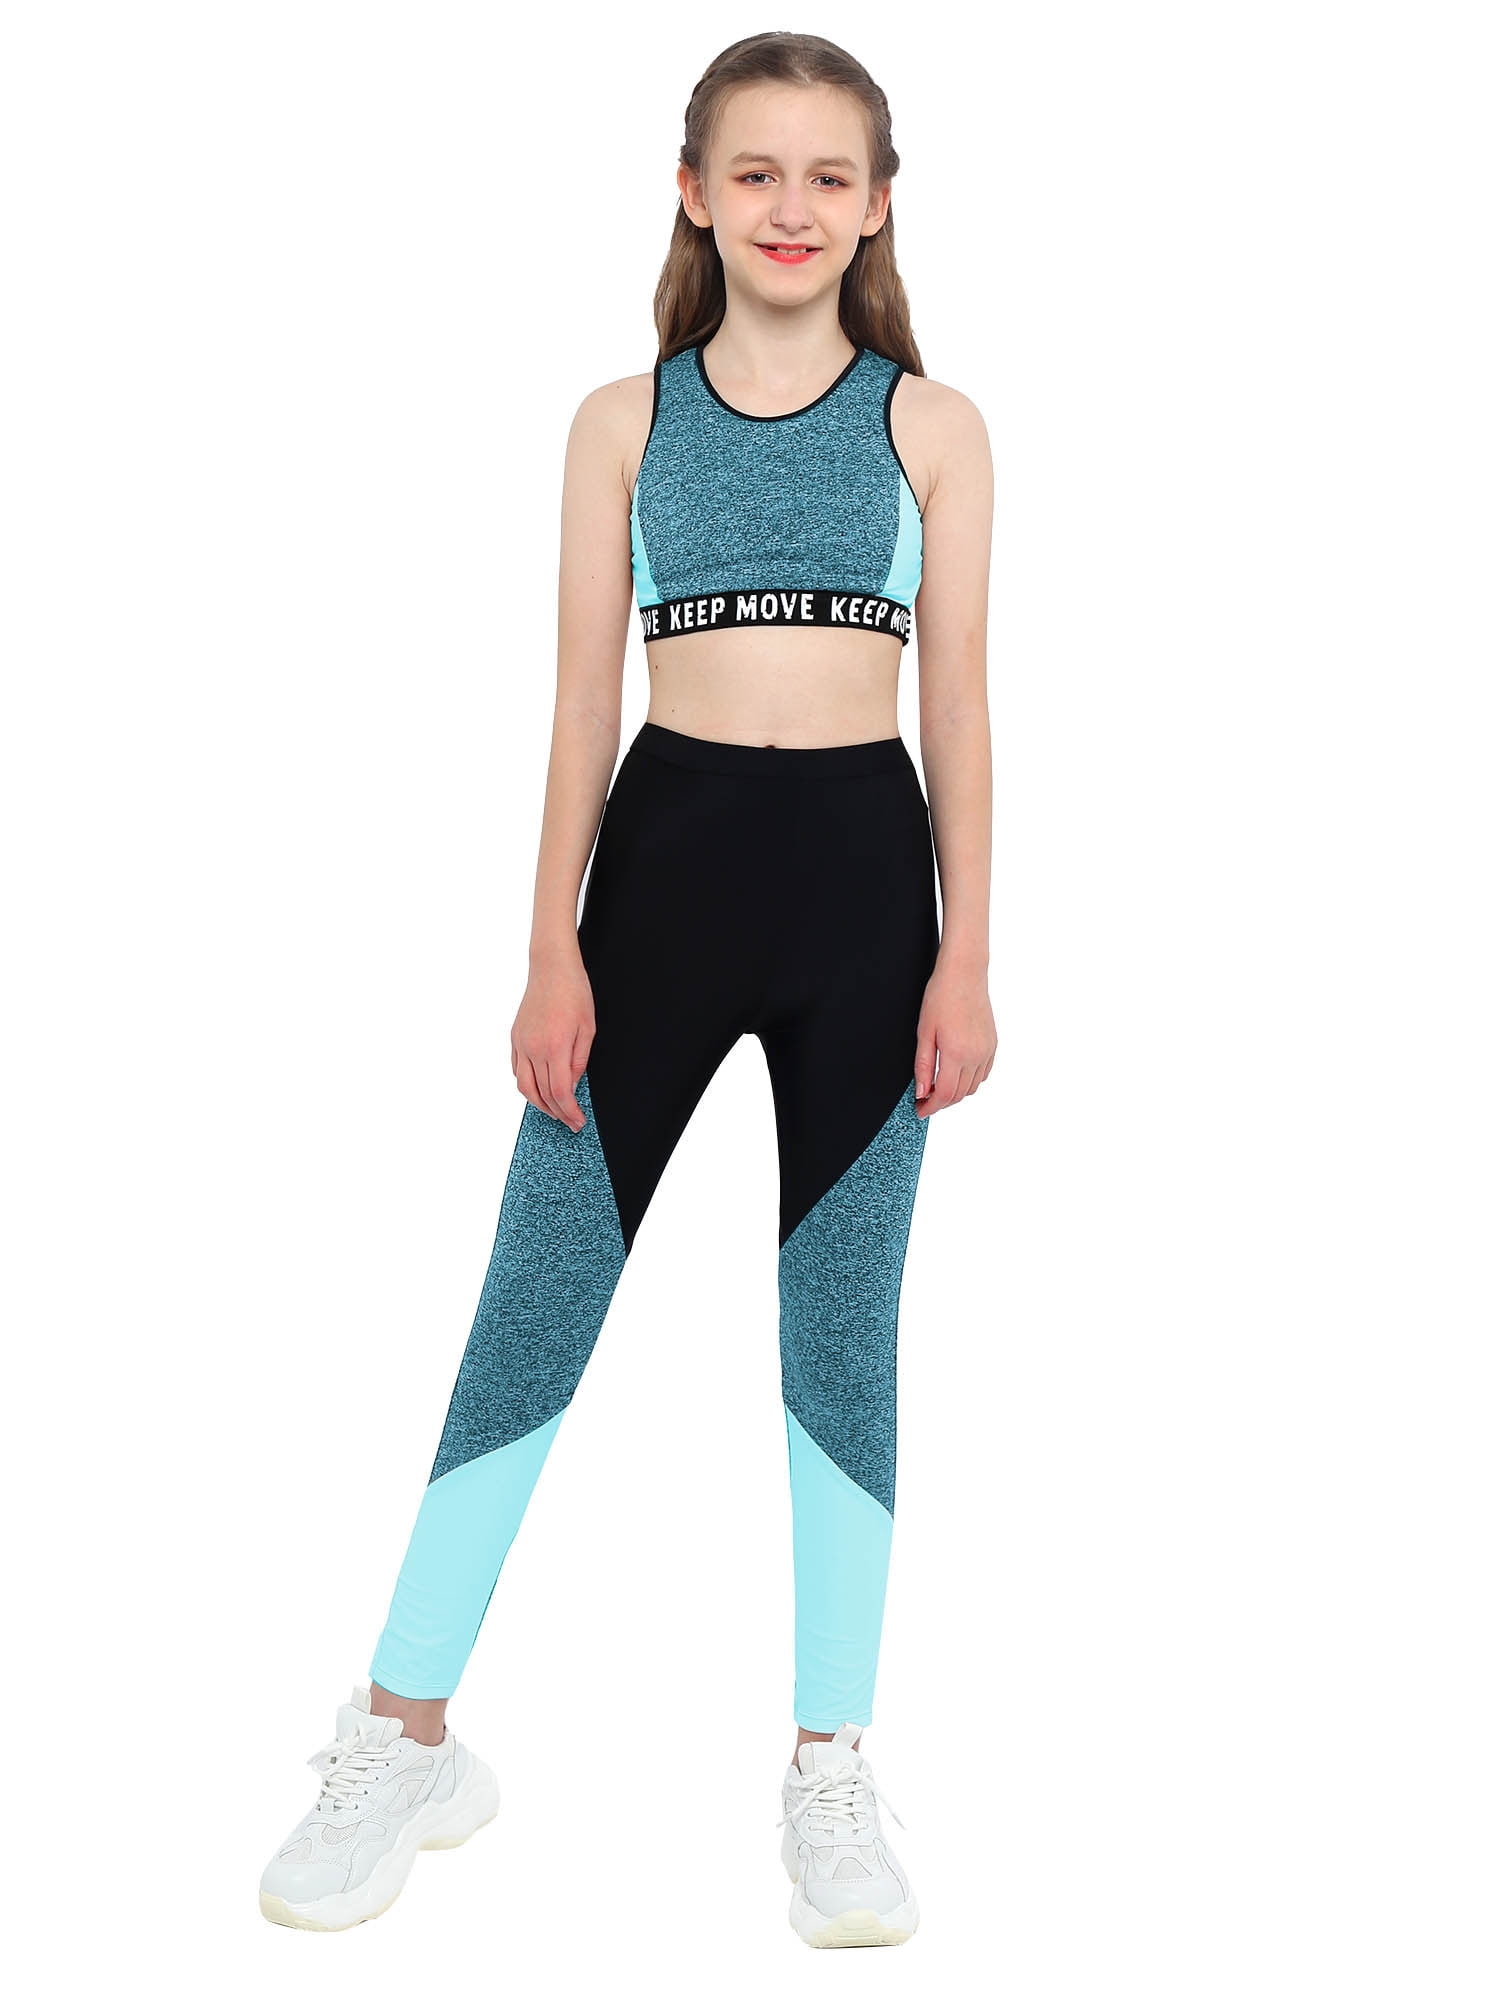 inhzoy Kids Girls Athletic Outfit Sports Bra Crop Top with Yoga Leggings  Blue 14